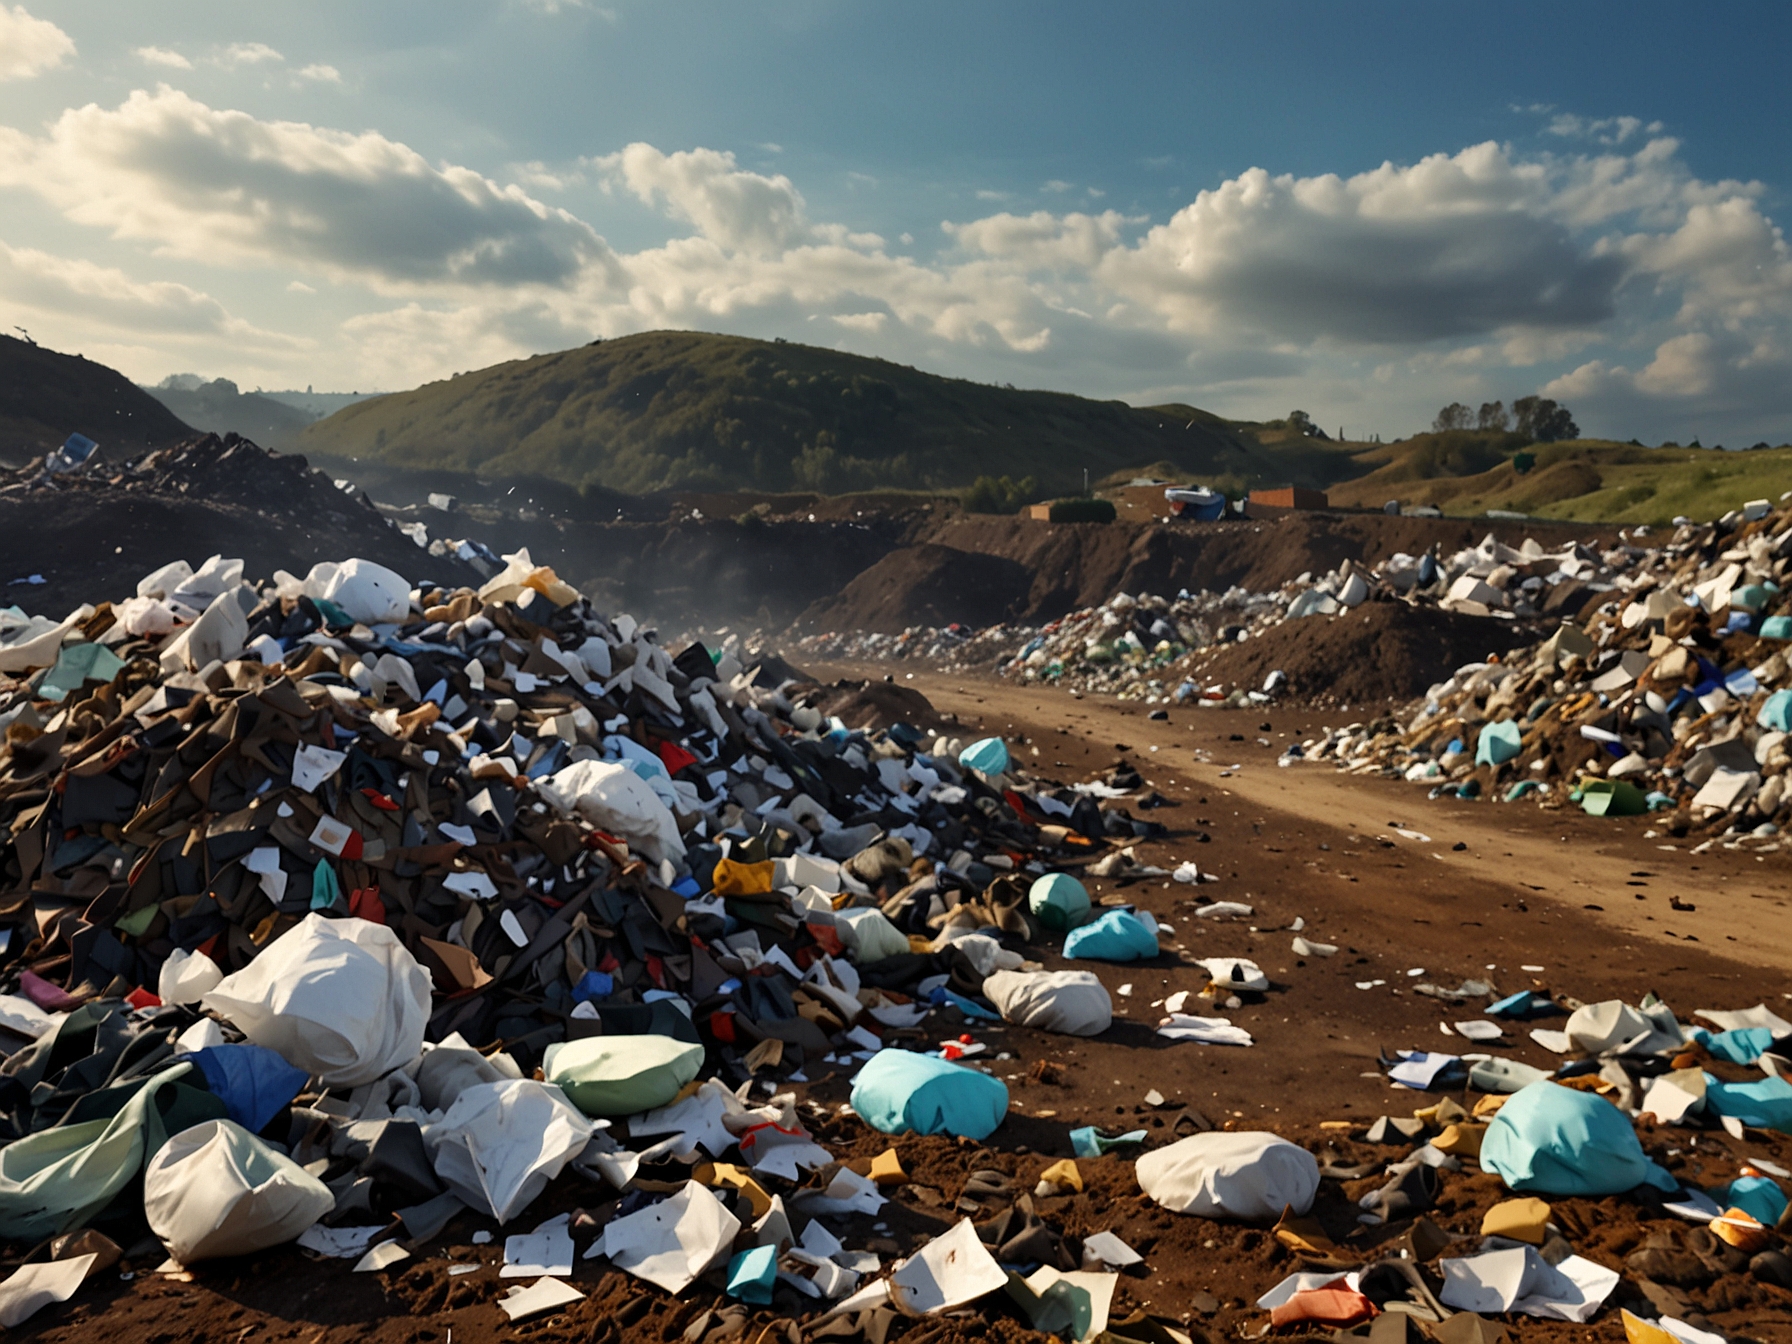 An overflowing landfill site with piles of discarded PPE, highlighting the environmental concerns and massive waste from the destruction of £1.4 billion worth of equipment.